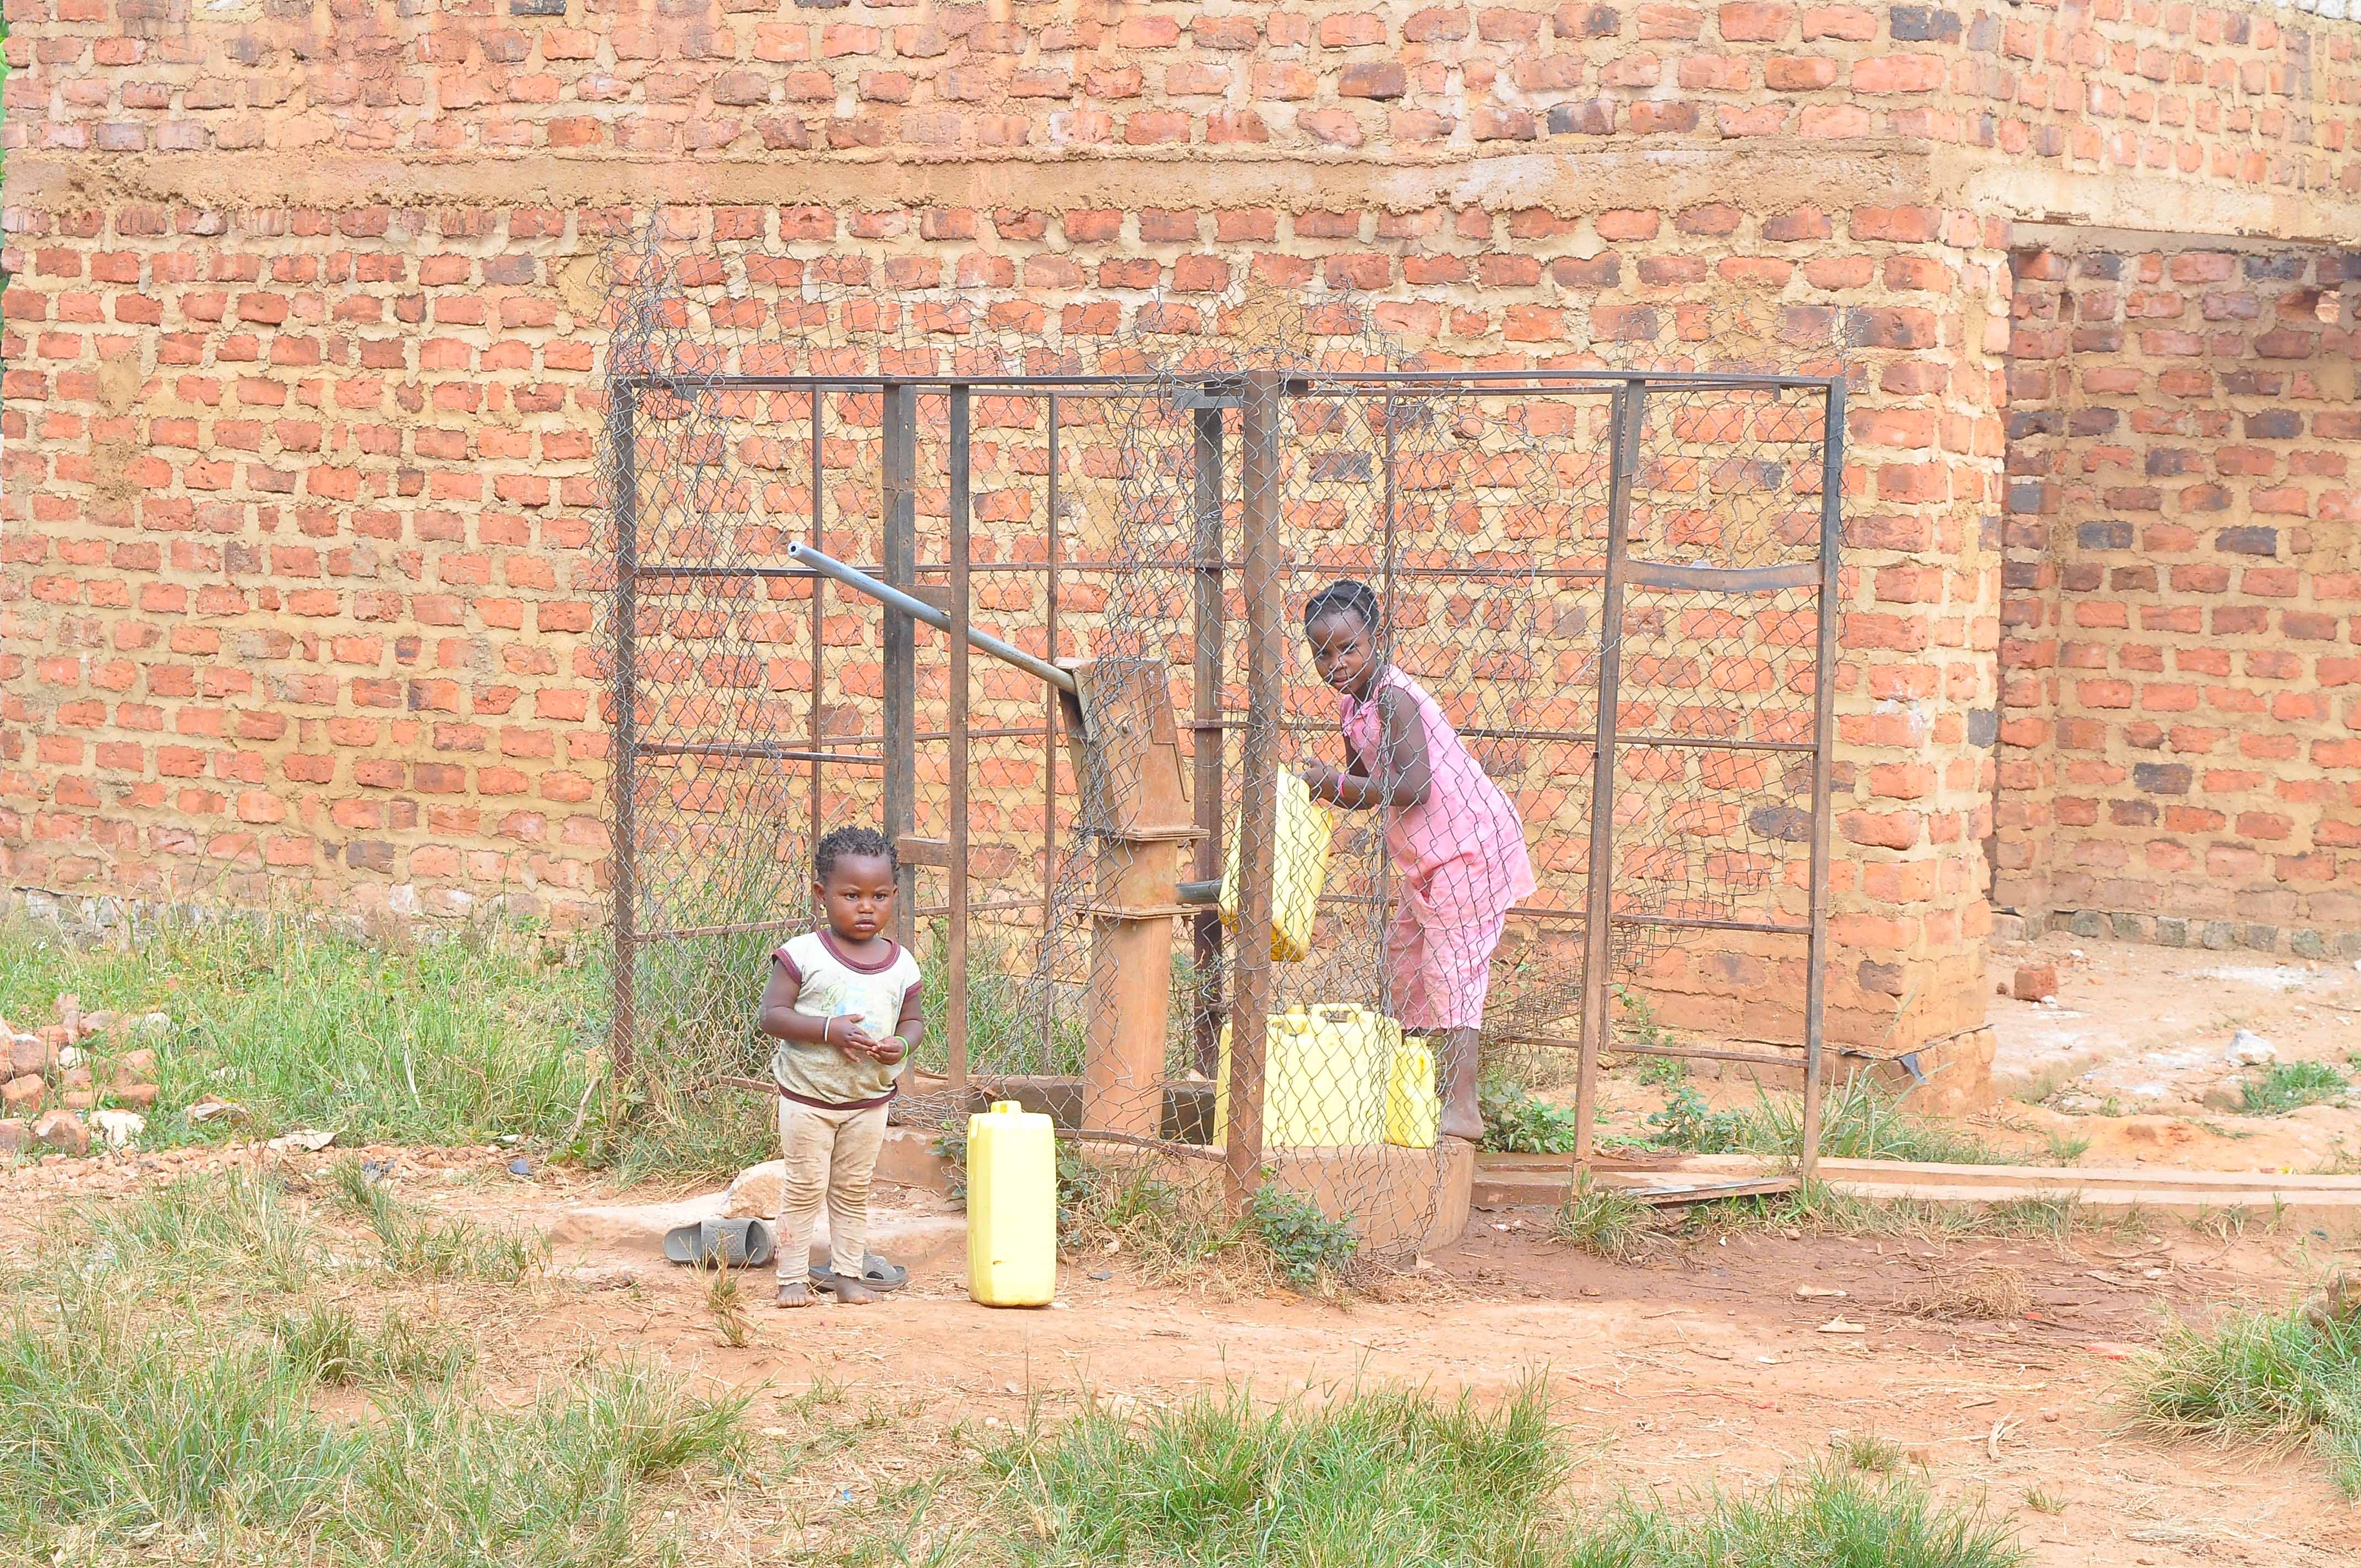 Is the provision of clean water creating more problems?